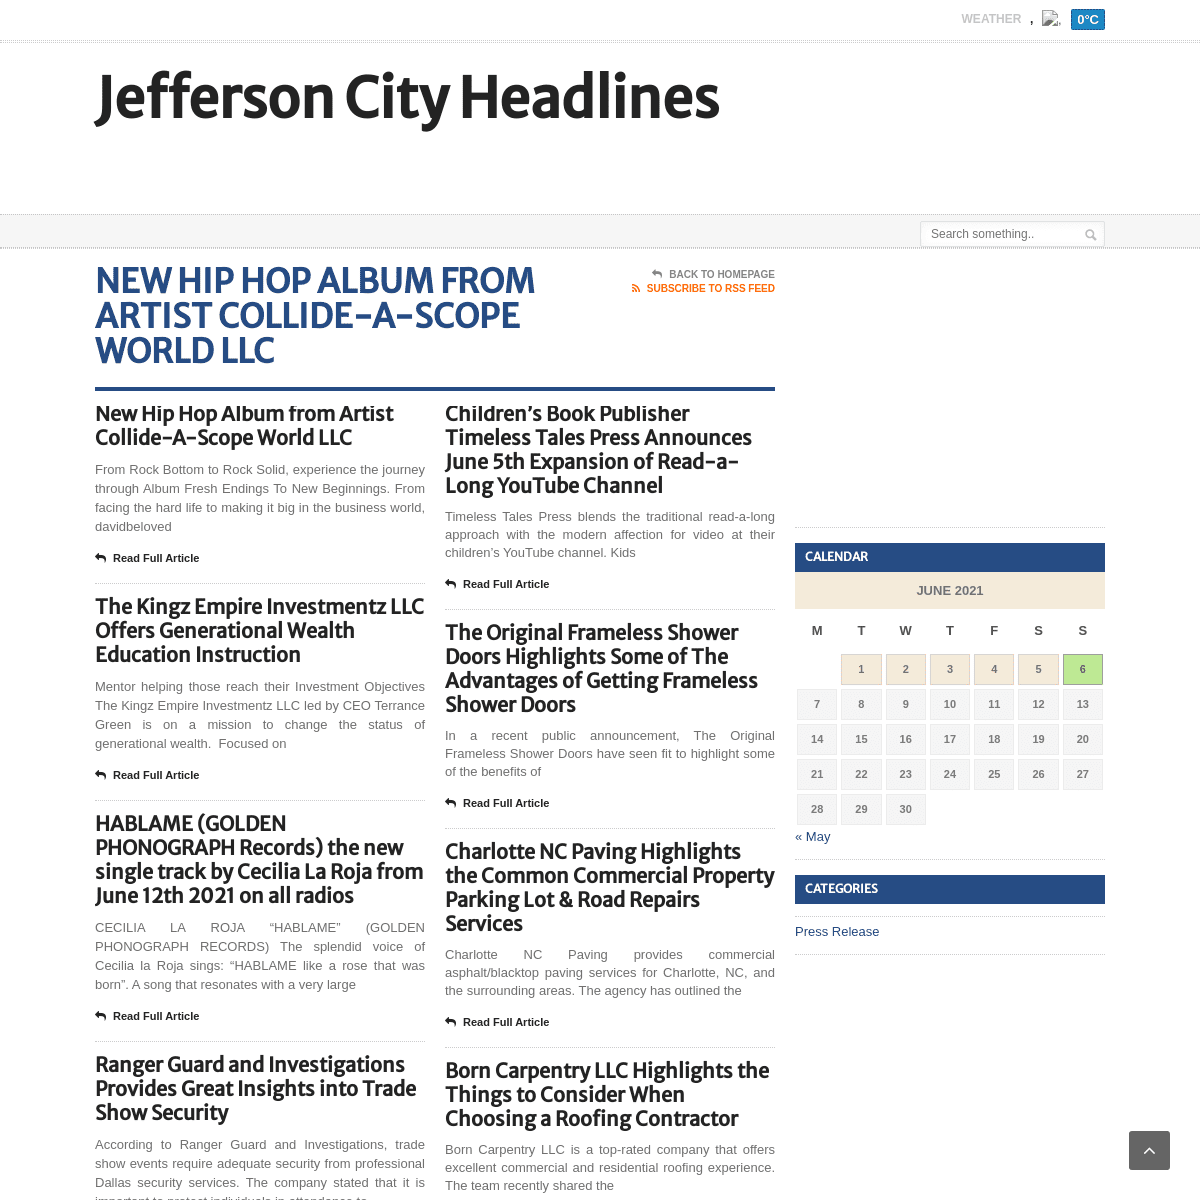 A complete backup of https://jeffersoncityheadlines.com